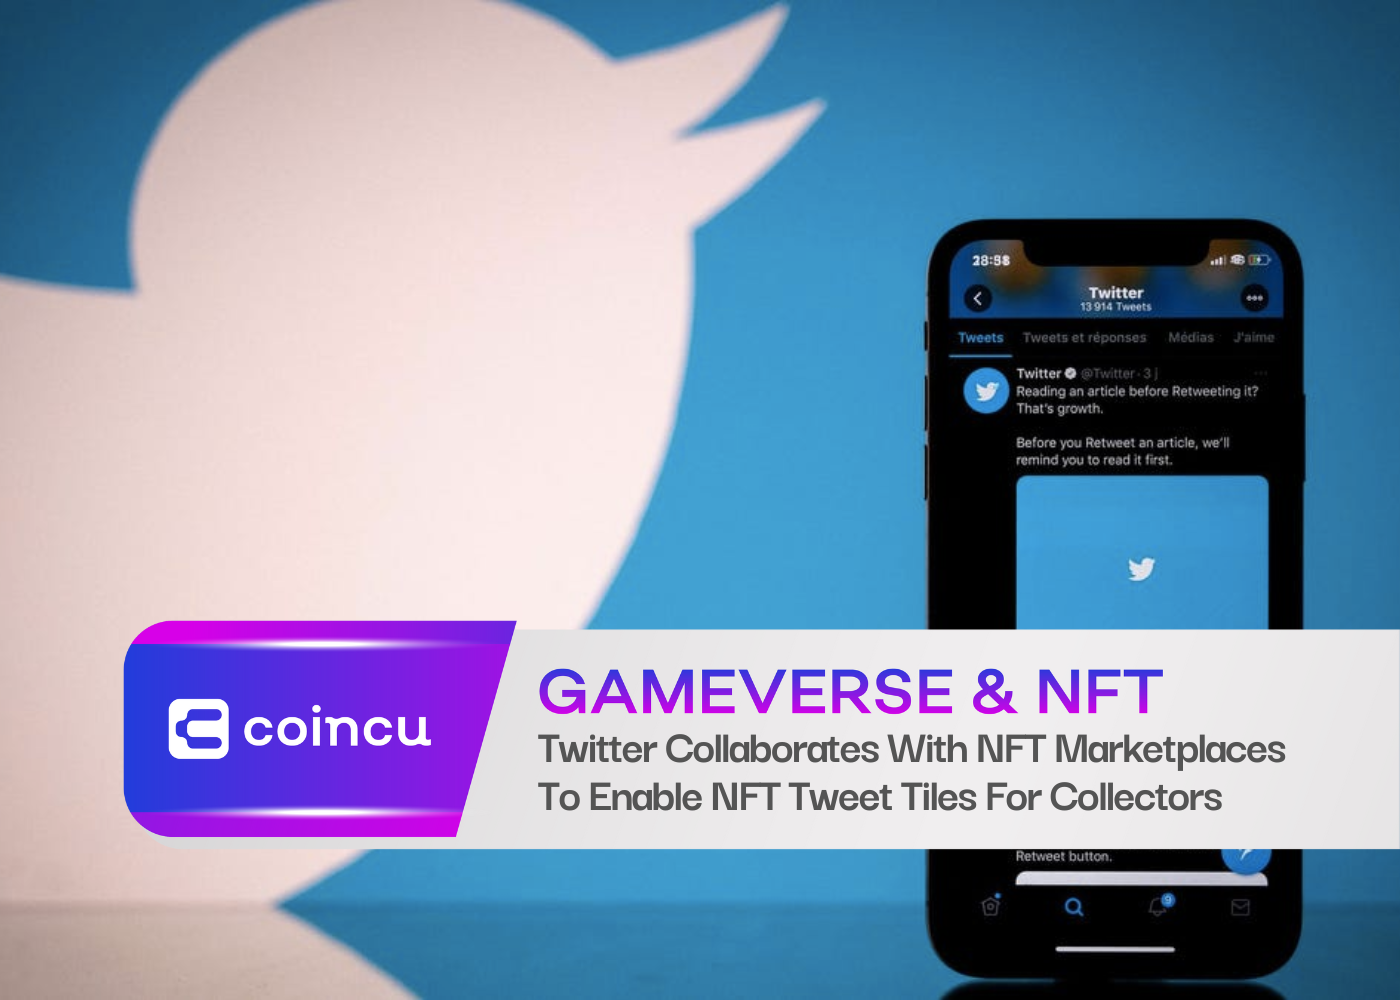 Twitter Collaborates With NFT Marketplaces To Enable NFT Tweet Tiles For Collectors